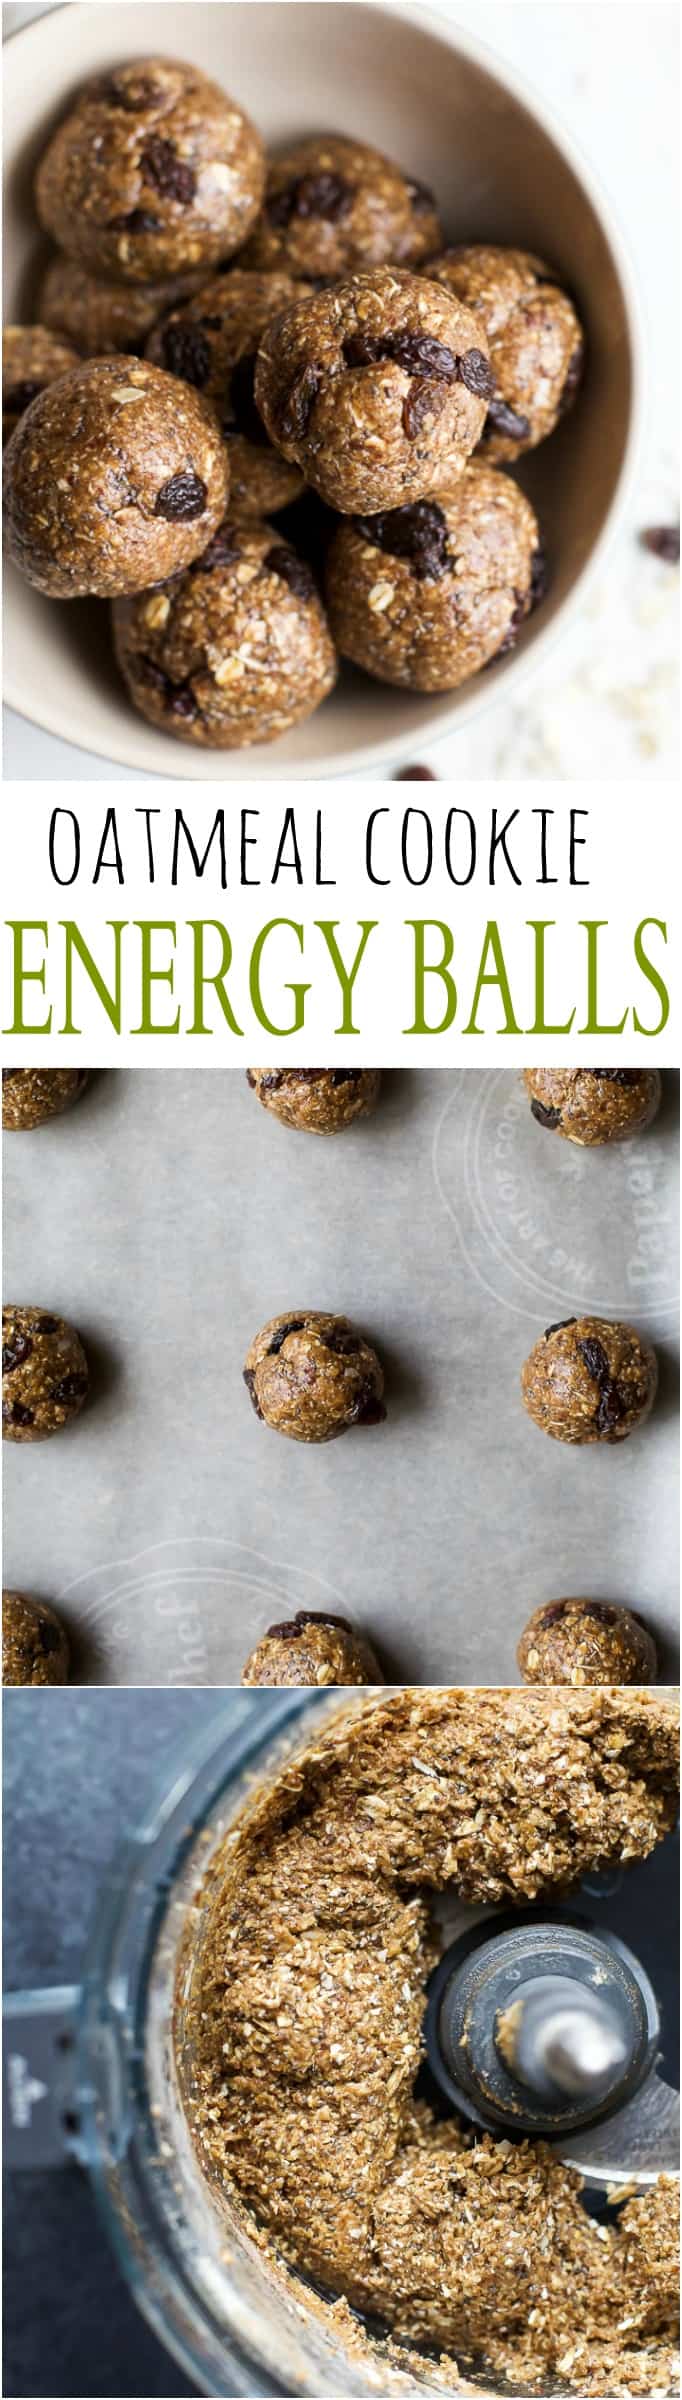 15 Minute No Bake Oatmeal Cookie Energy Bites, an easy healthy snack or on-the-go breakfast option! Filled with hearty oats, maple syrup, and sweet raisins, these energy bites taste just like an Oatmeal Cookie! | joyfulhealthyeats.com